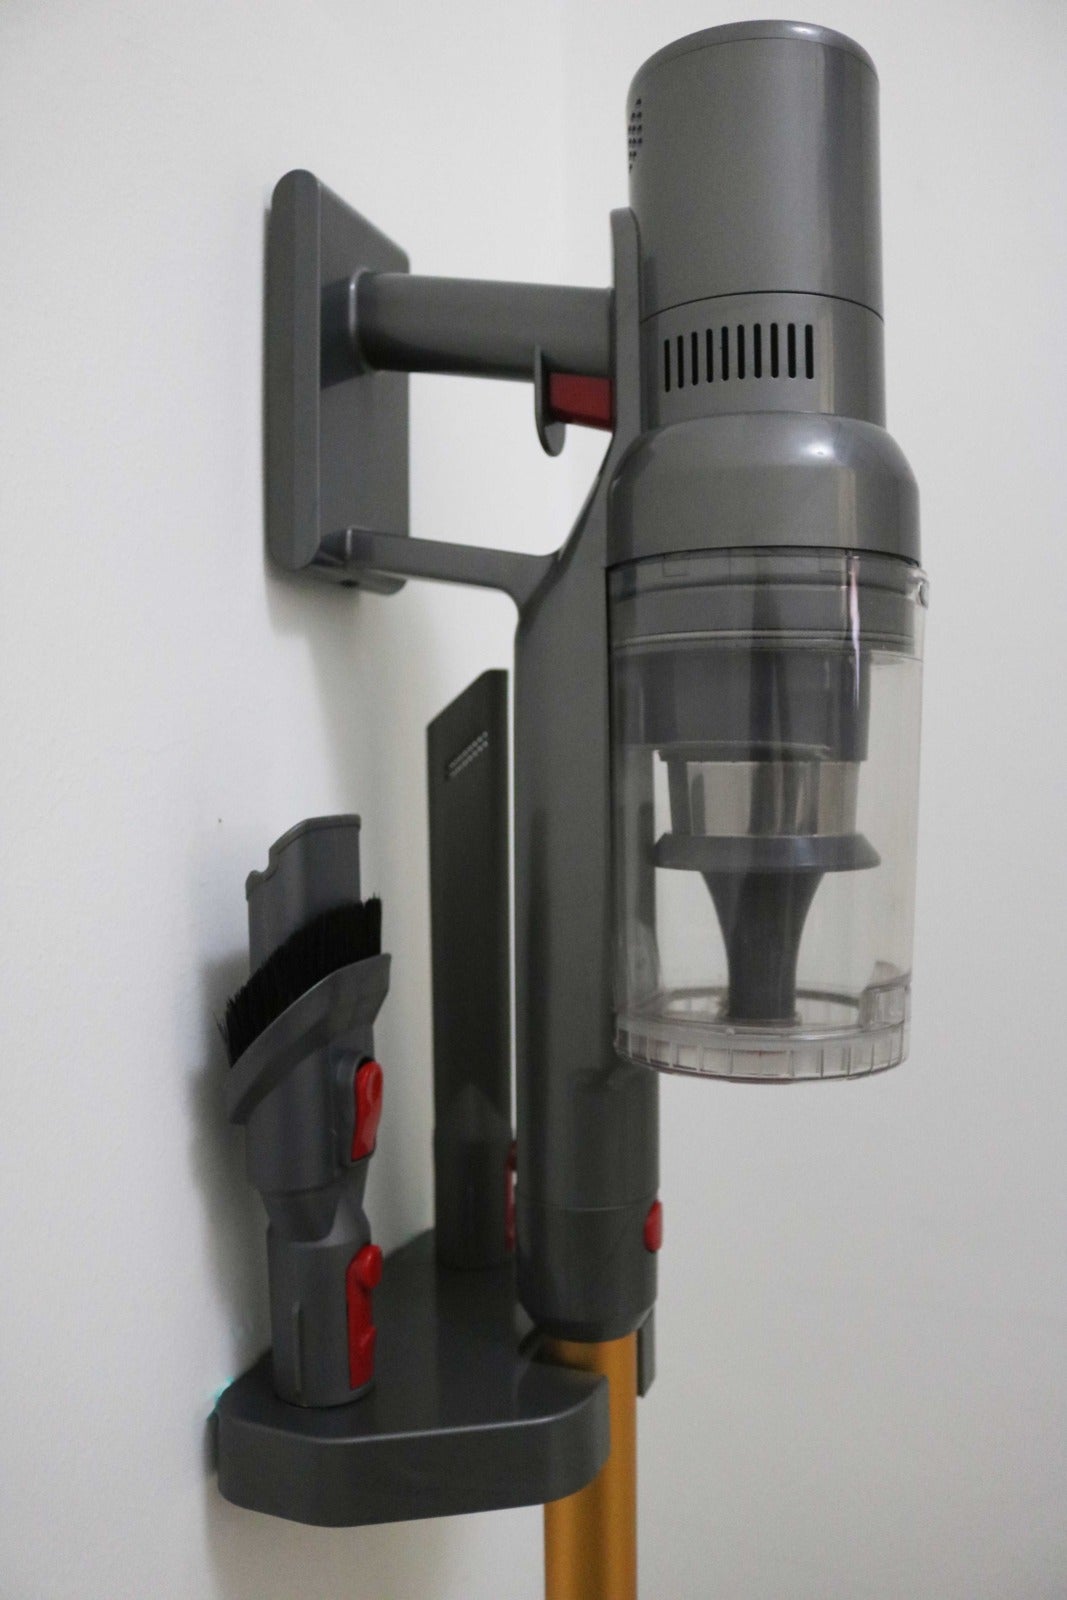 AirbotMax Stand attachments